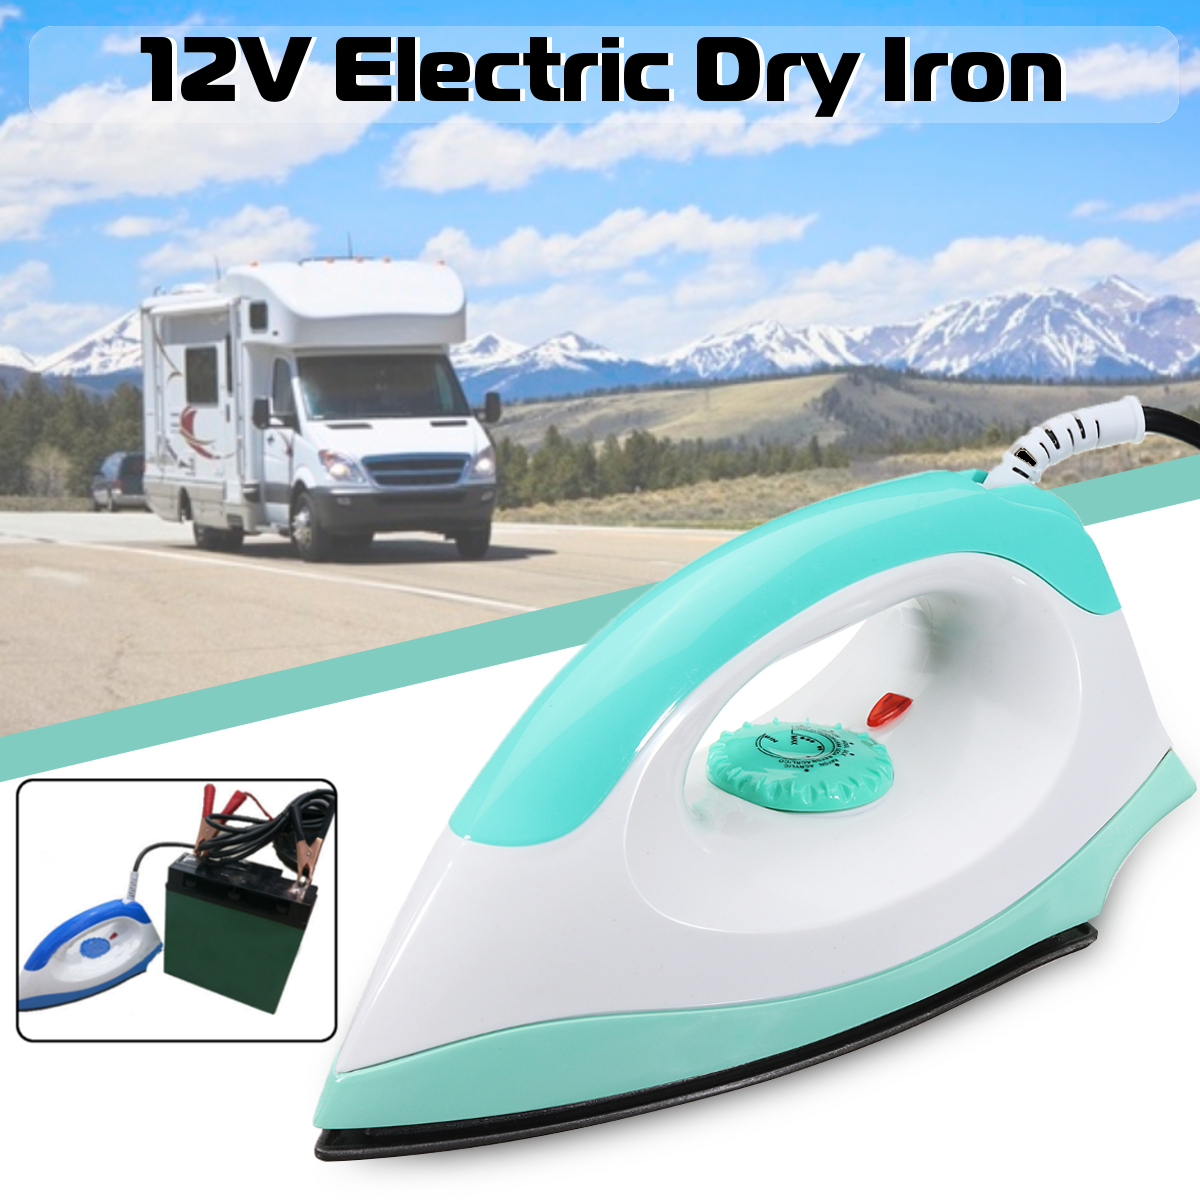 150W-DC12V-Mini-Electric-Iron-Portable-Clothes-Dry-Handheld-Steamer-Steam-Irons-Travel-Equipment-1347808-1